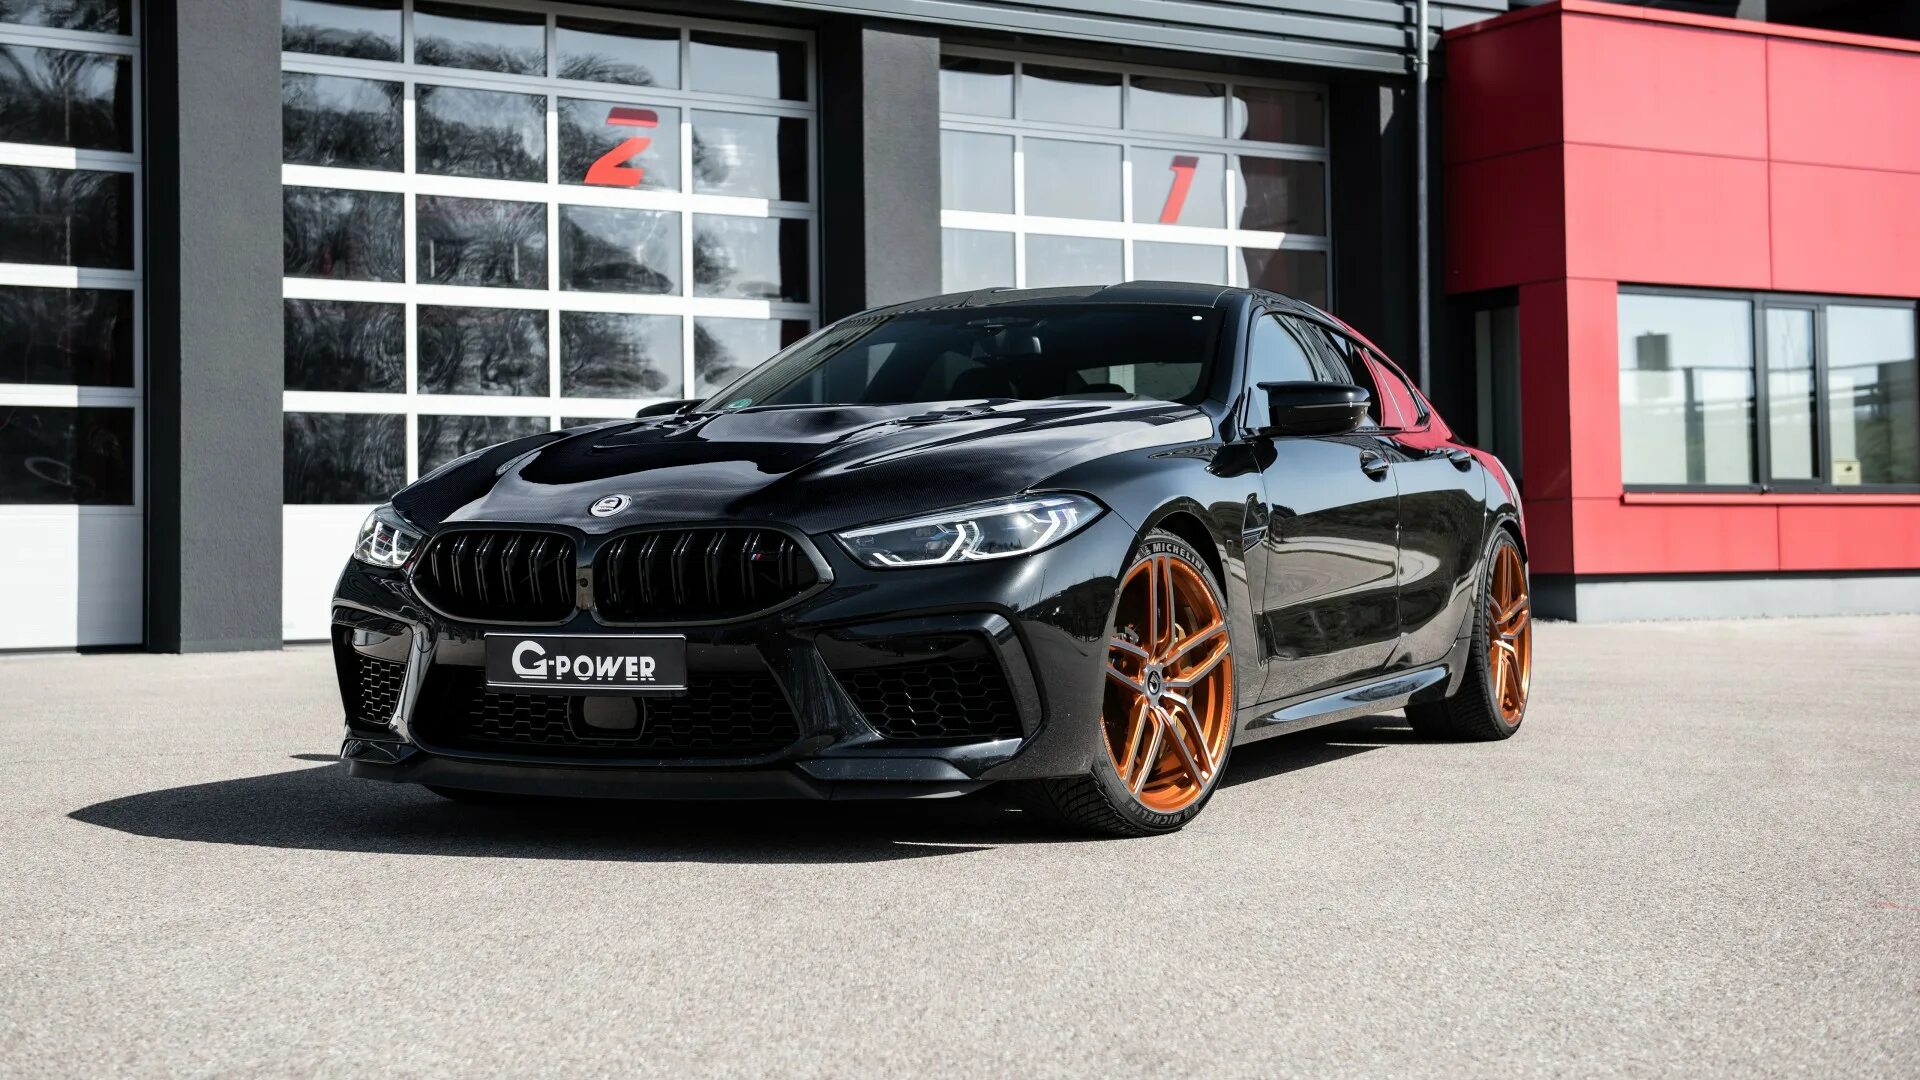 Bmw m 8 competition. BMW m8 Competition Gran Coupe. BMW m8 Competition черная. BMW m8 g Power. BMW м8 Gran Coupe Competition.